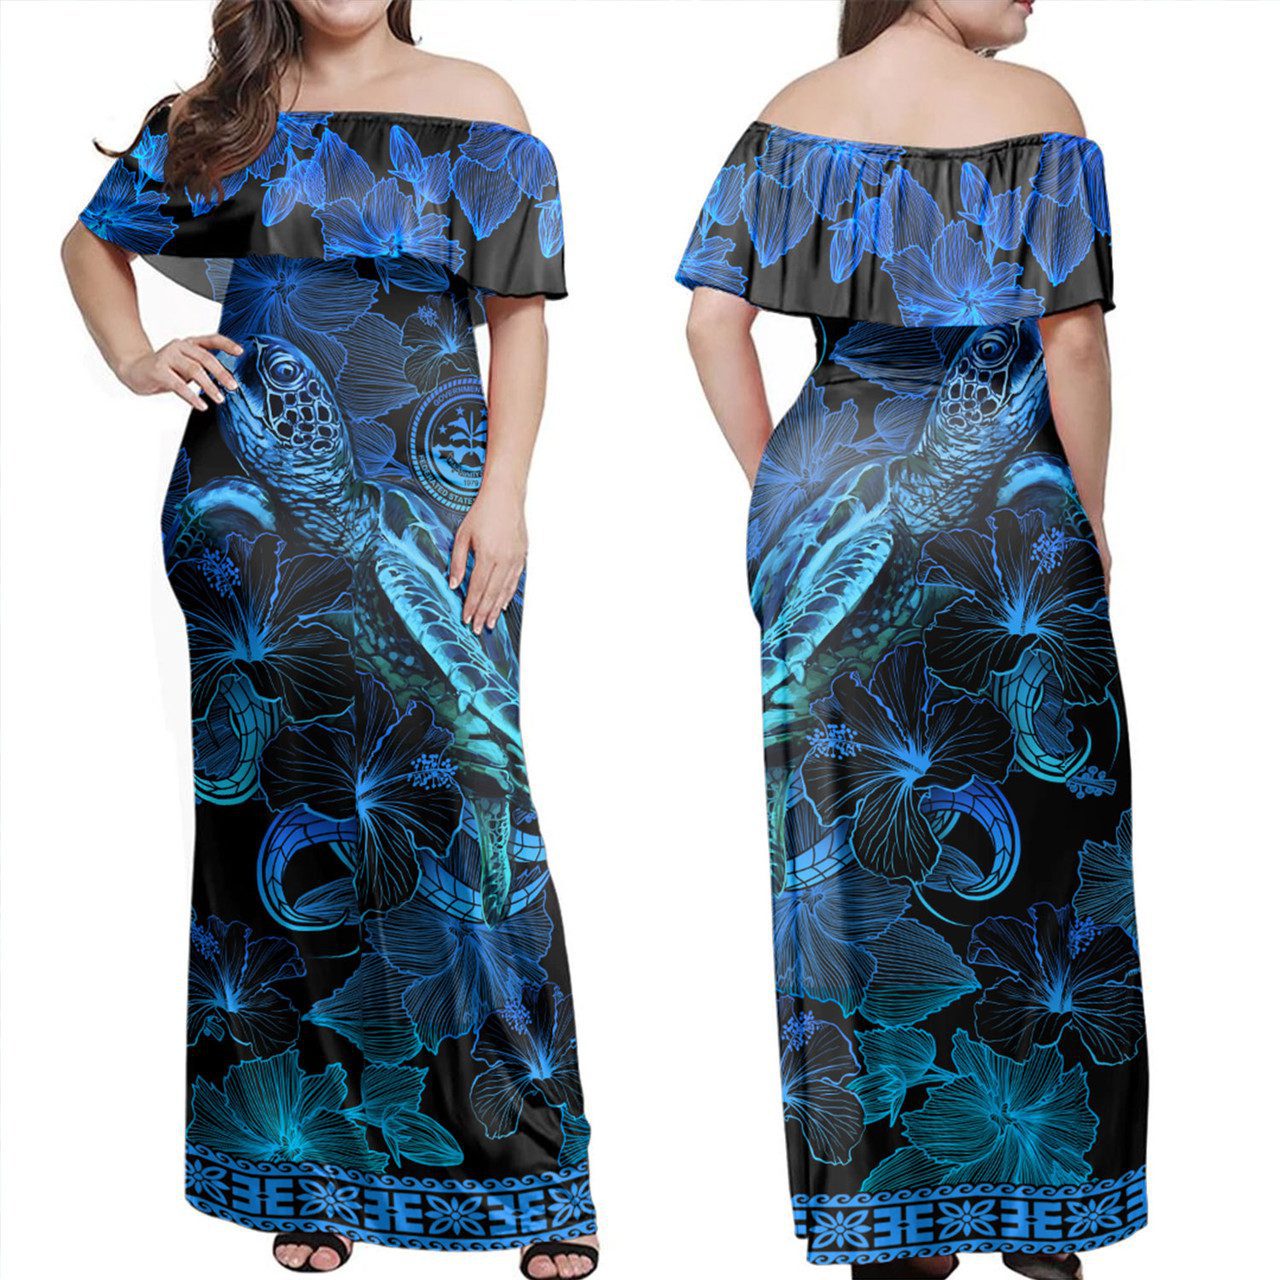 Federated States Of Micronesia Off Shoulder Long Dress Sea Turtle With Blooming Hibiscus Flowers Tribal Blue